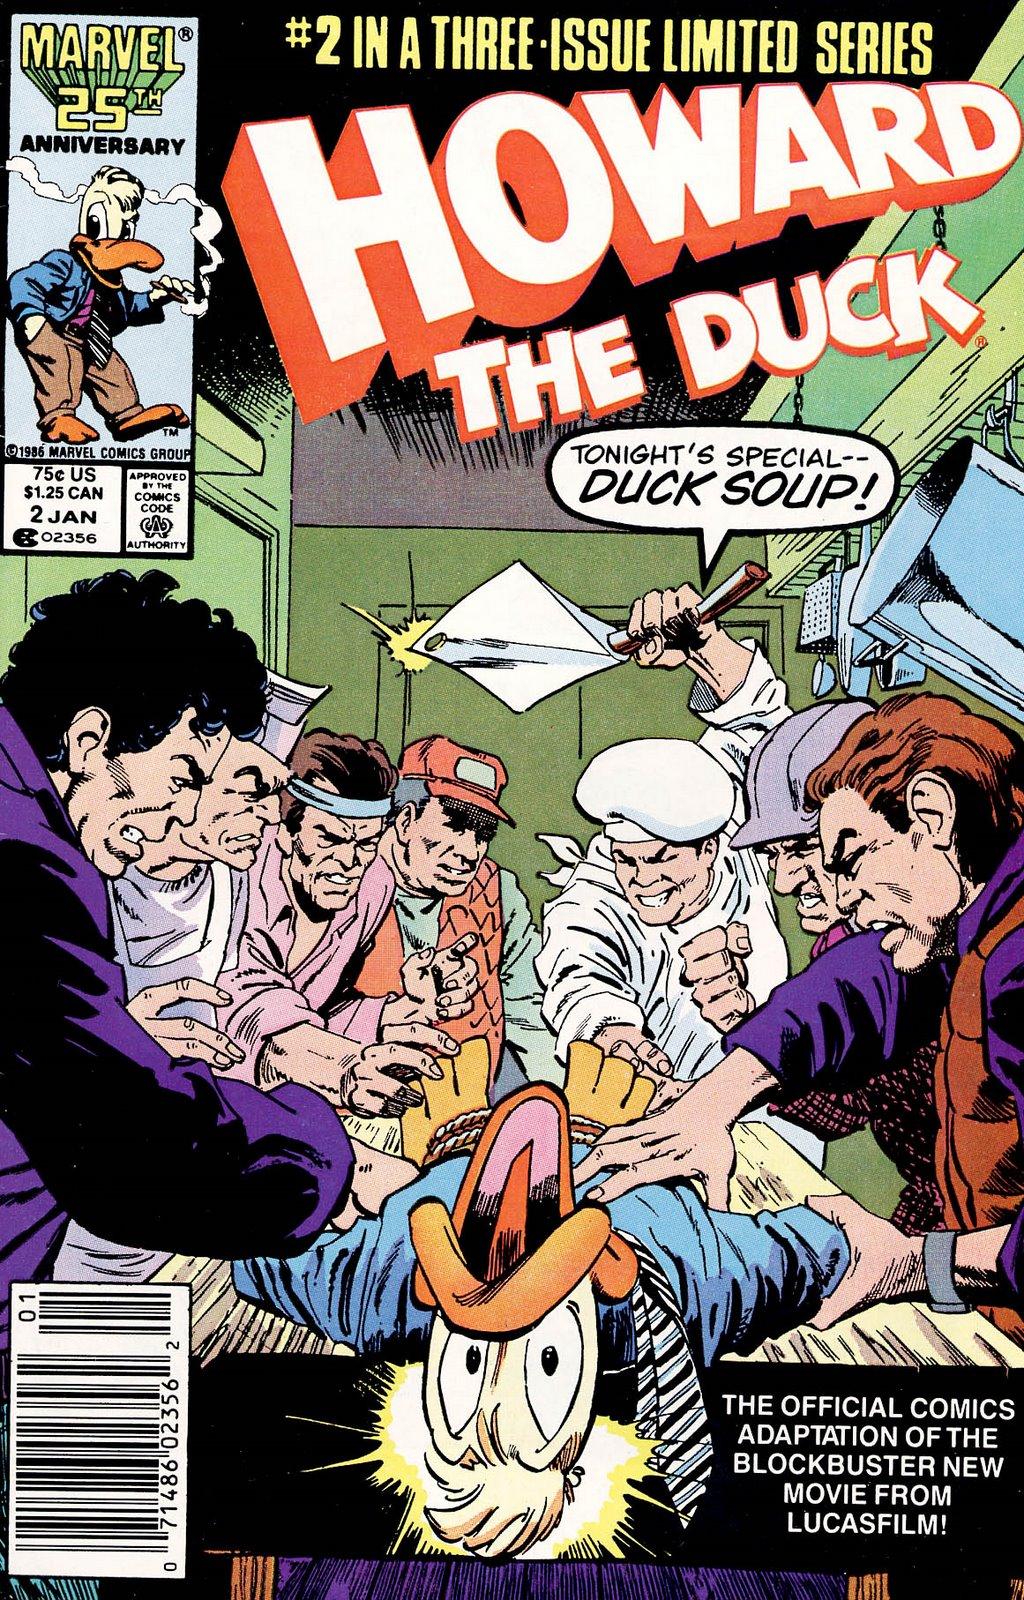 Howard the Duck: The Movie Vol. 1 #2